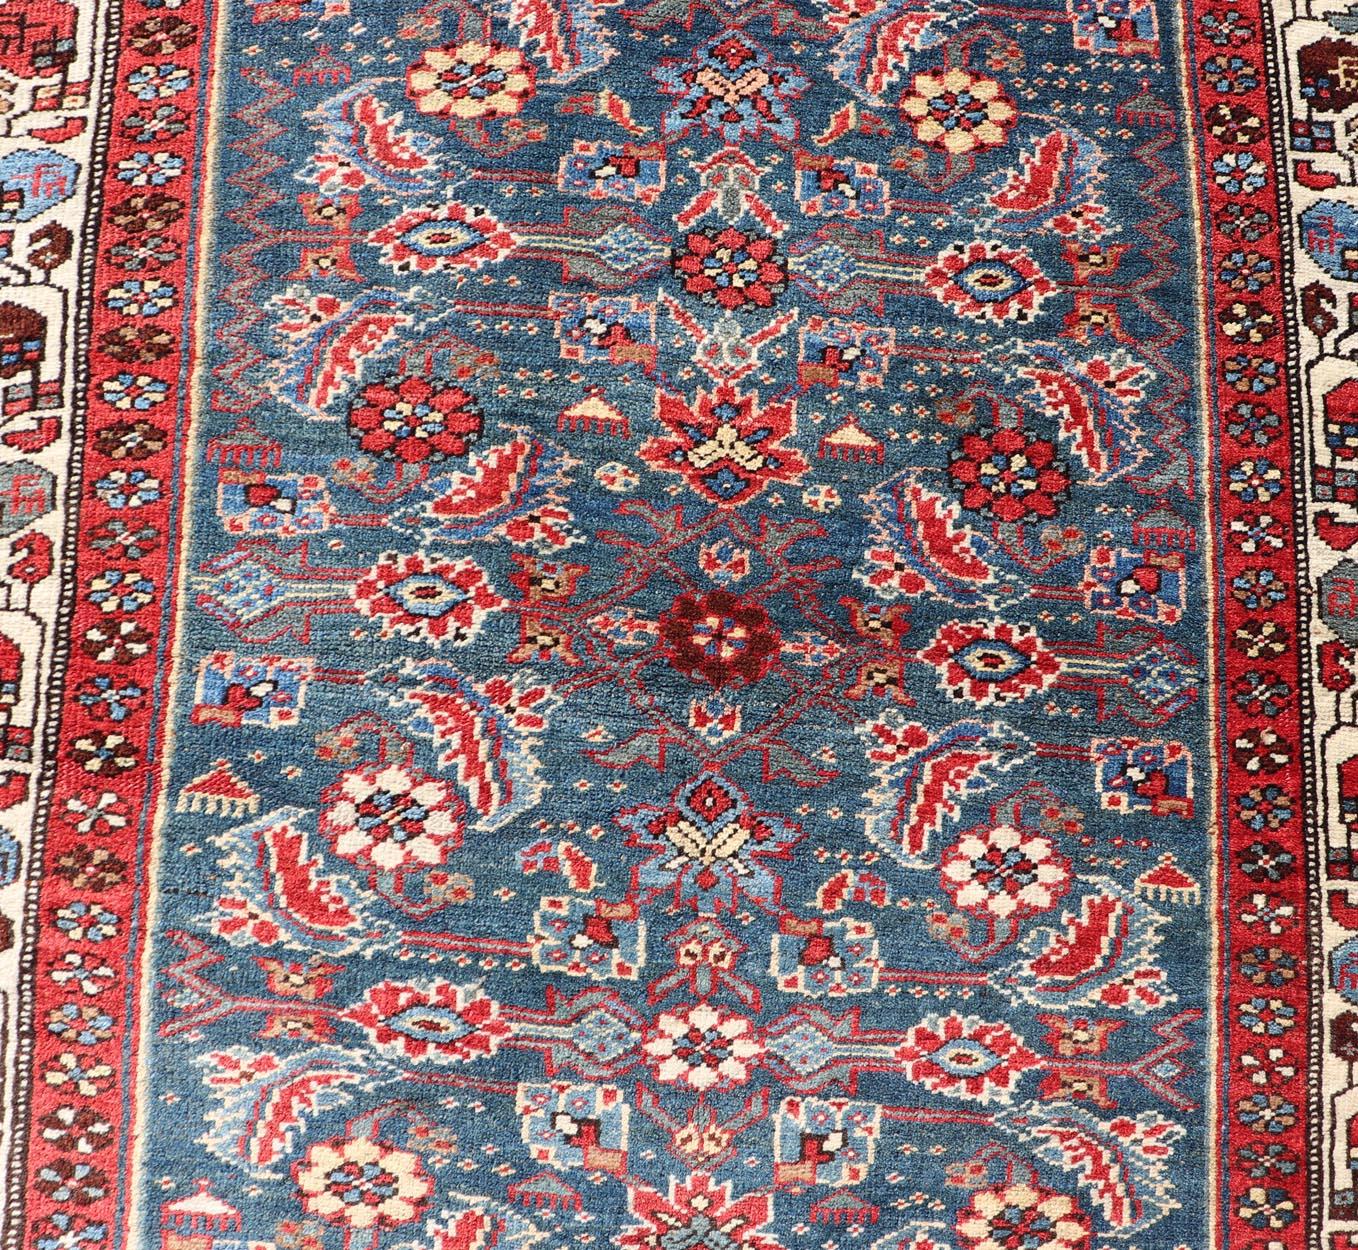 Antique Persian Bidjar Rug with Large Floral Motifs in Blue, Red, and Ivory For Sale 1